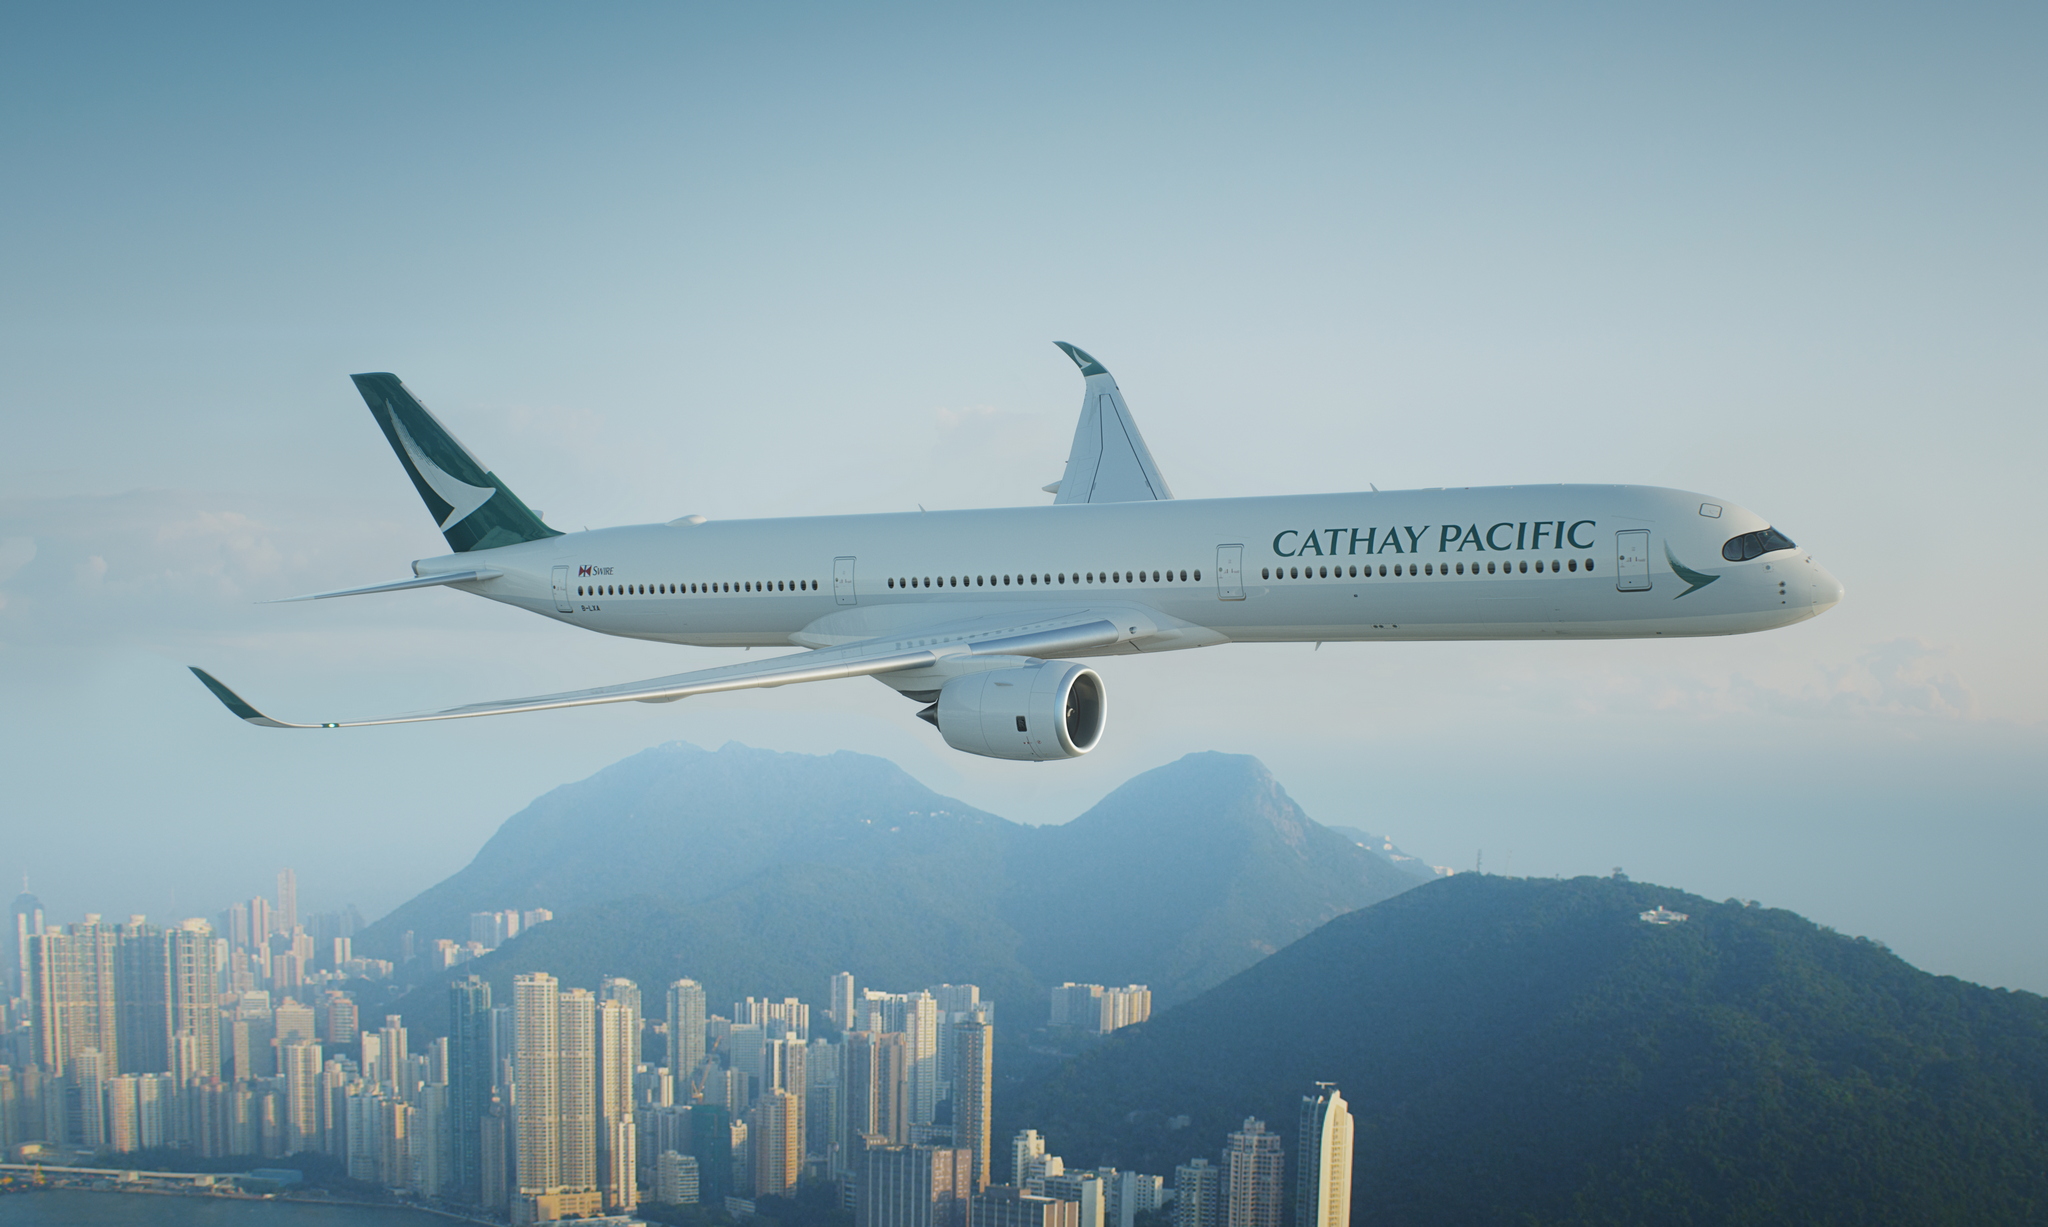 Cathay Pacific A350-1000 flying.